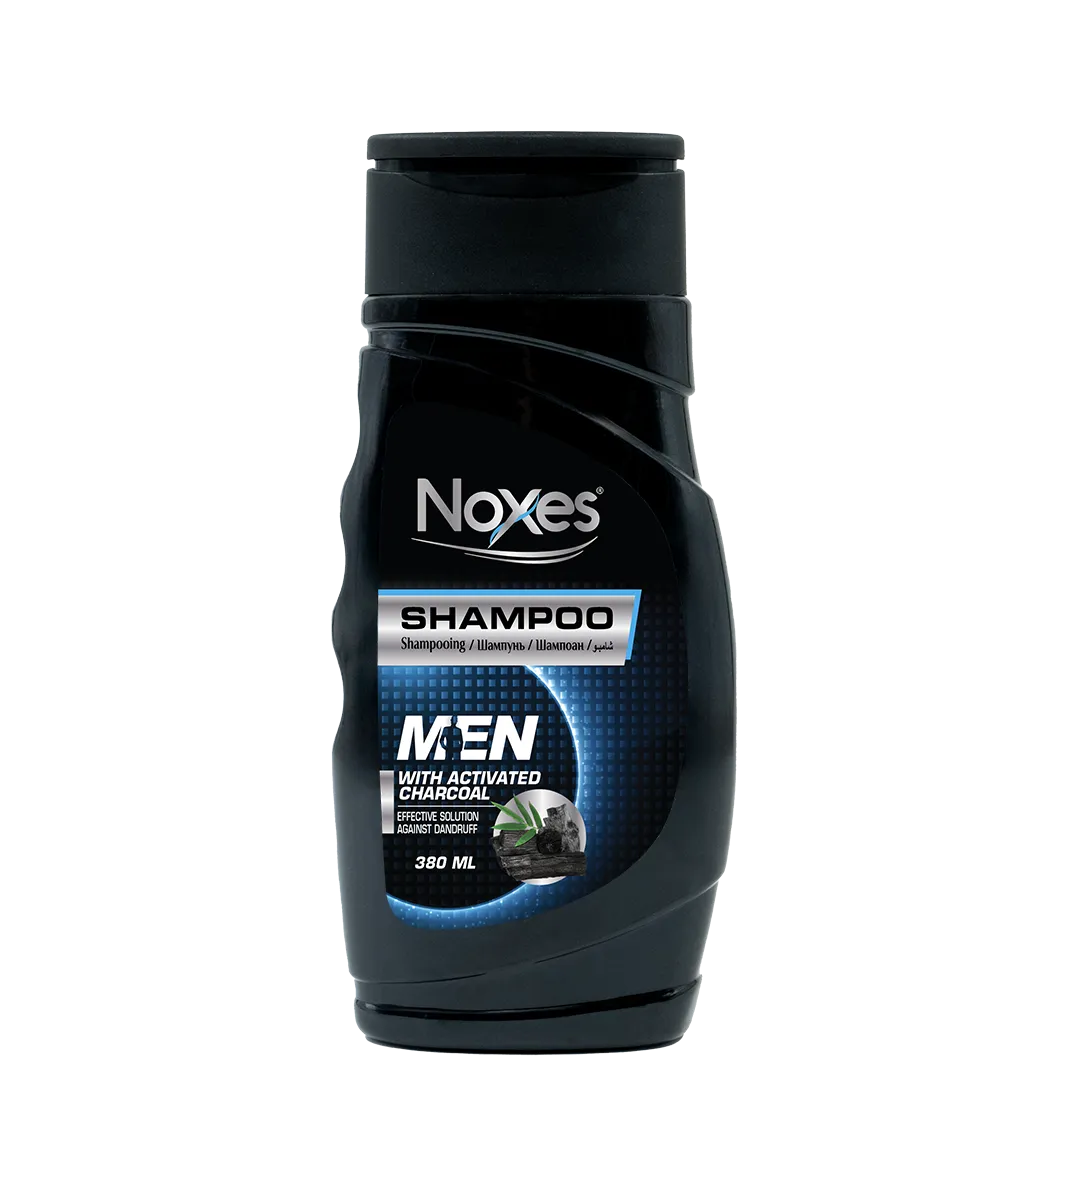 NOXES 380 ML SHAMPOO FOR MEN WITH ACTIVATED CHARCOAL